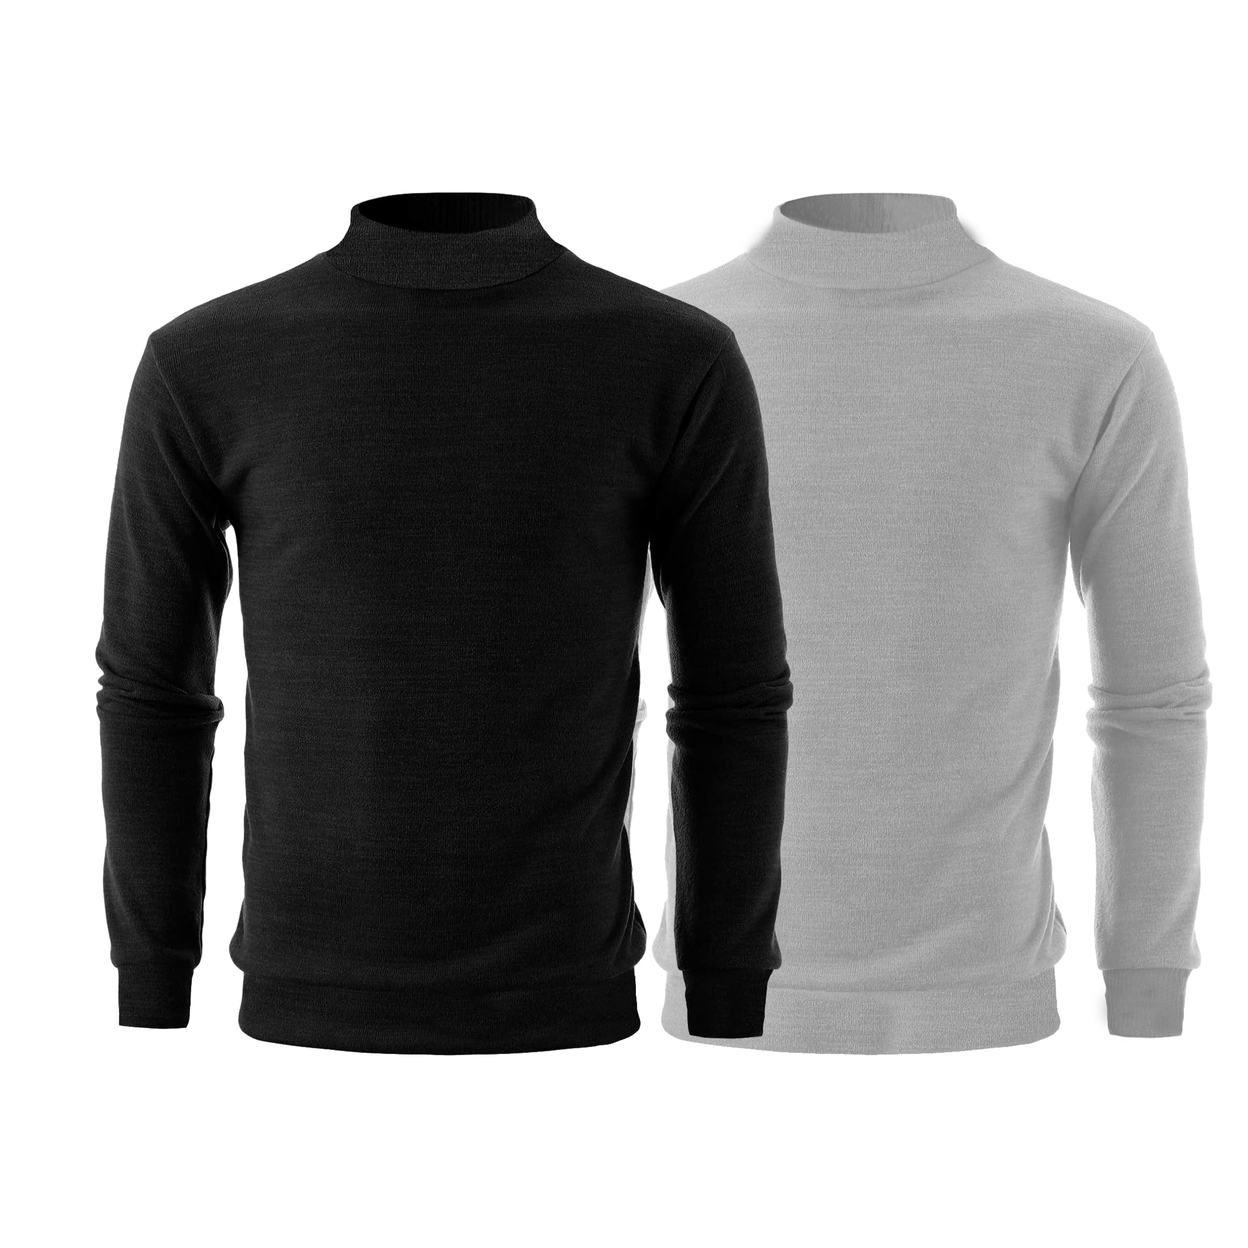 2-Pack: Men's Winter Warm Cozy Knit Slim Fit Mock Neck Sweater - White & White, Large